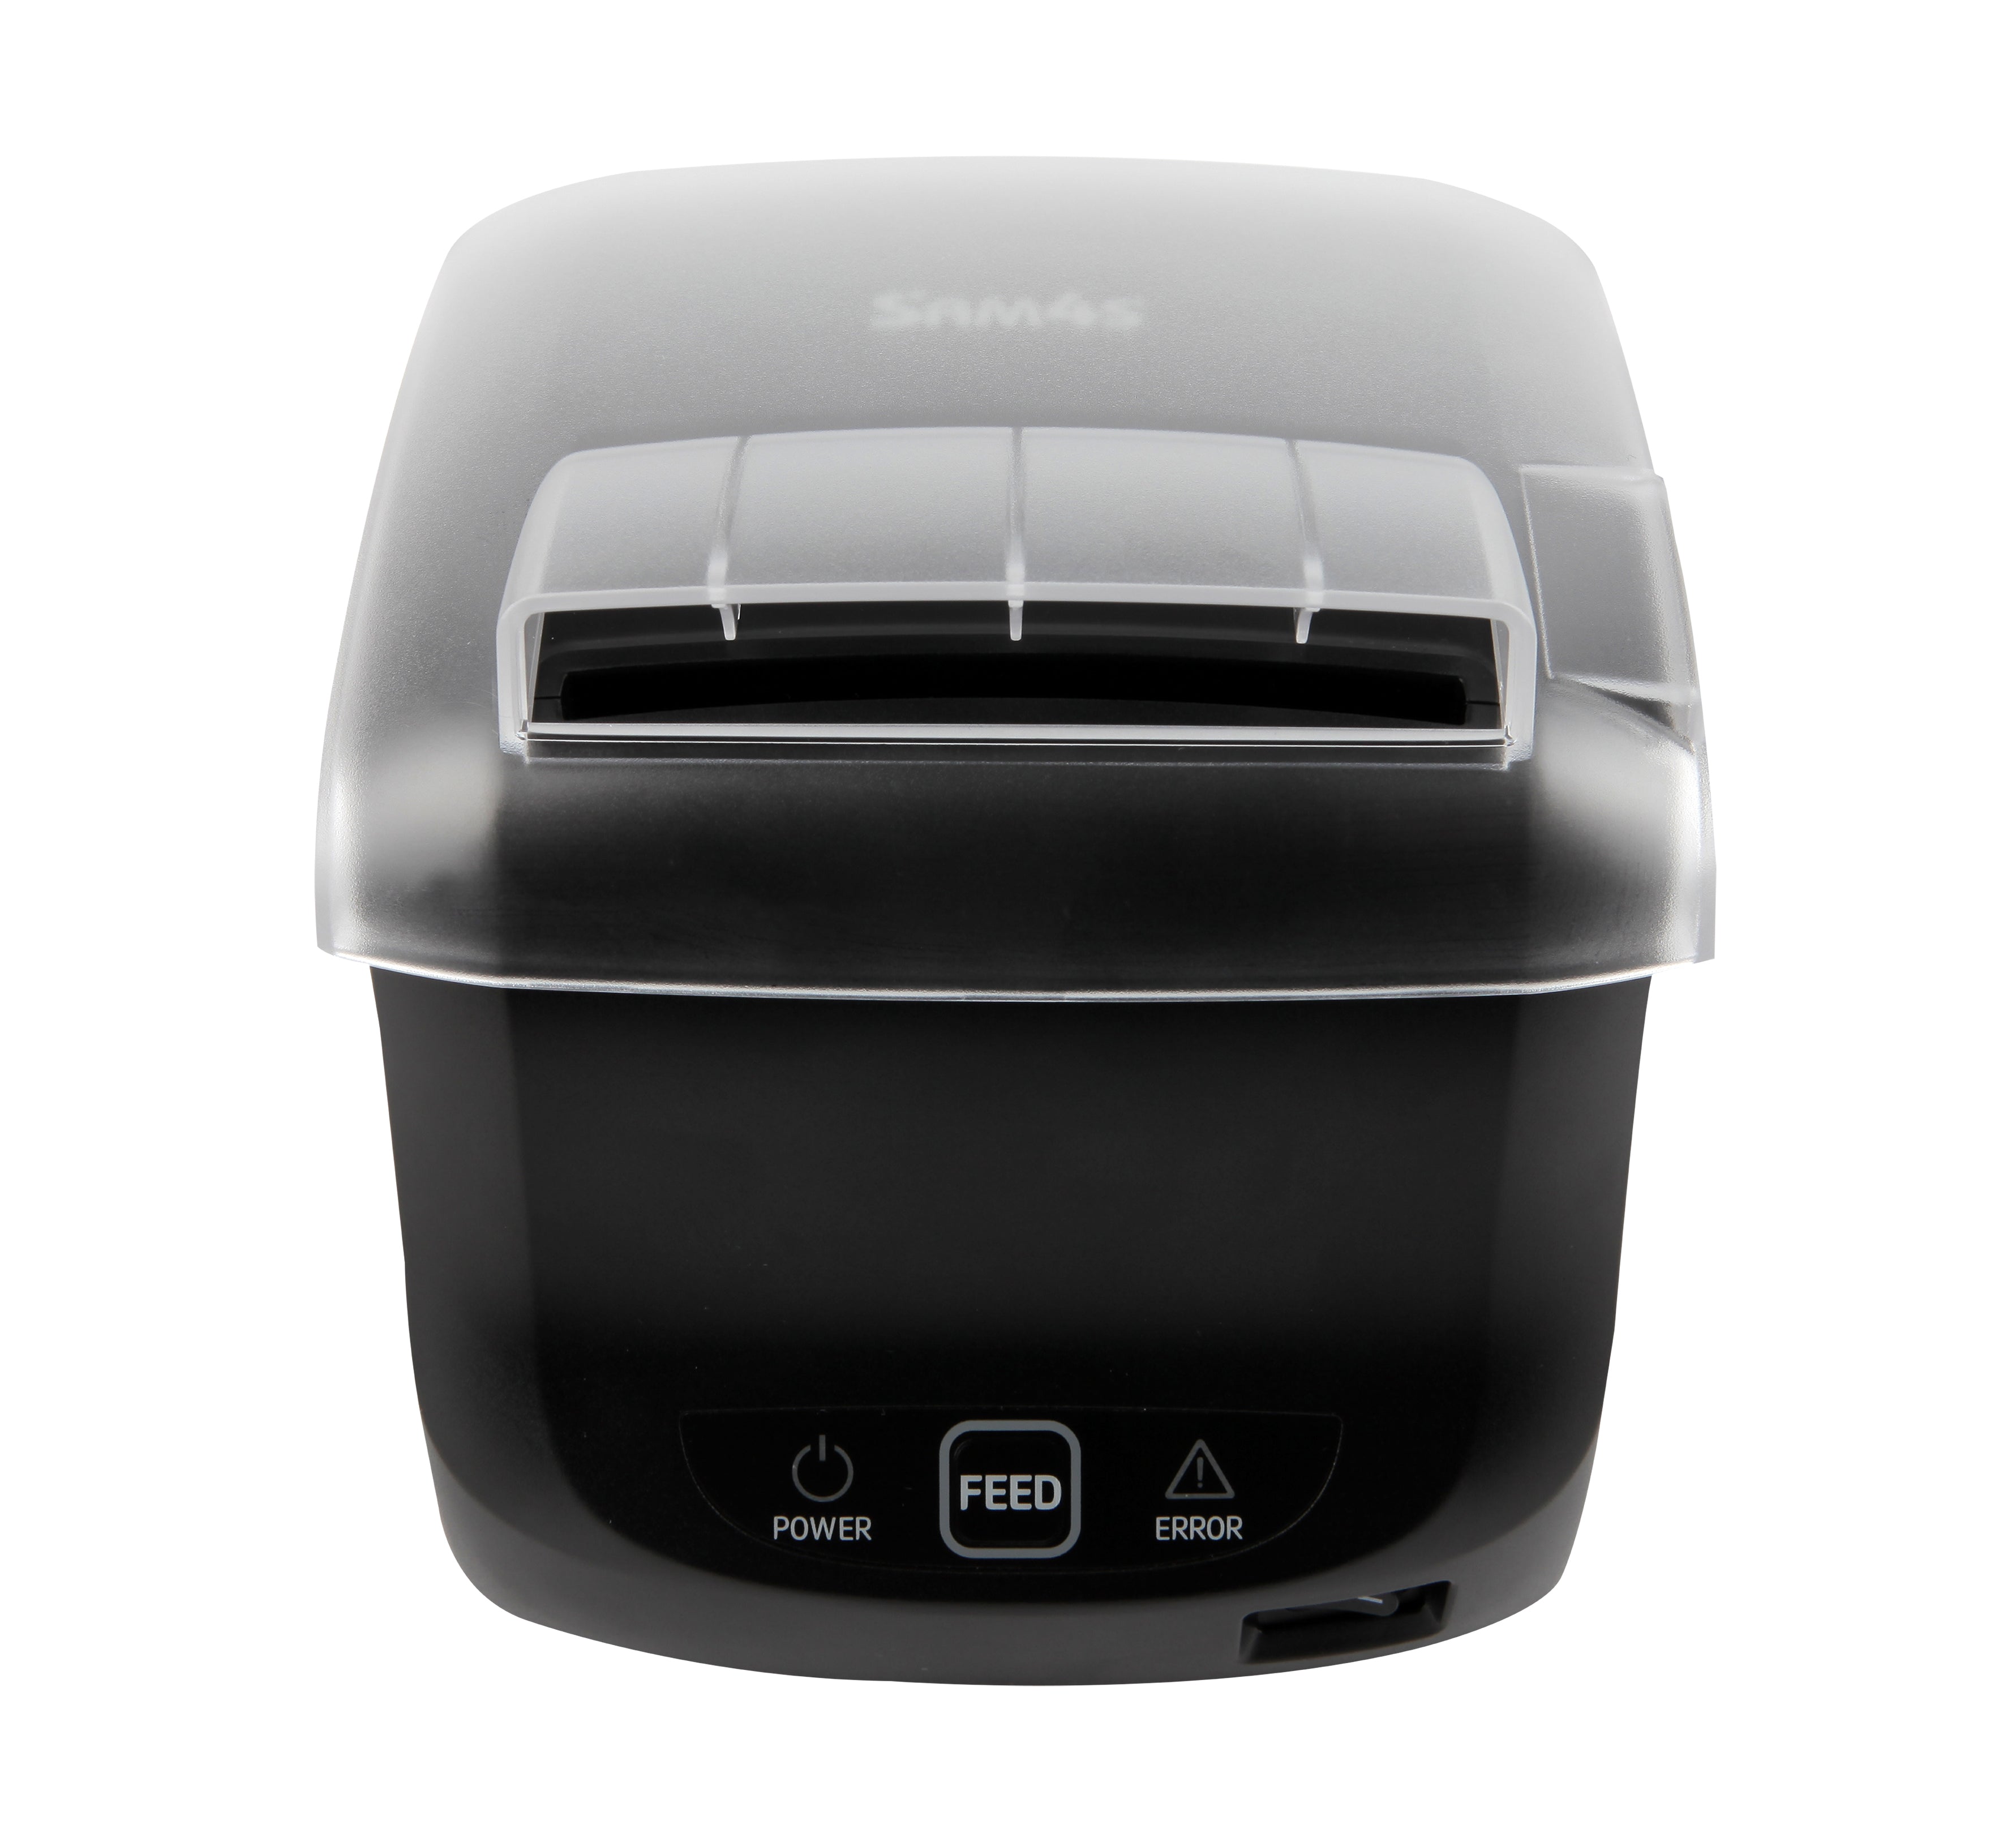 GIANT-100, Direct Thermal Receipt Printer